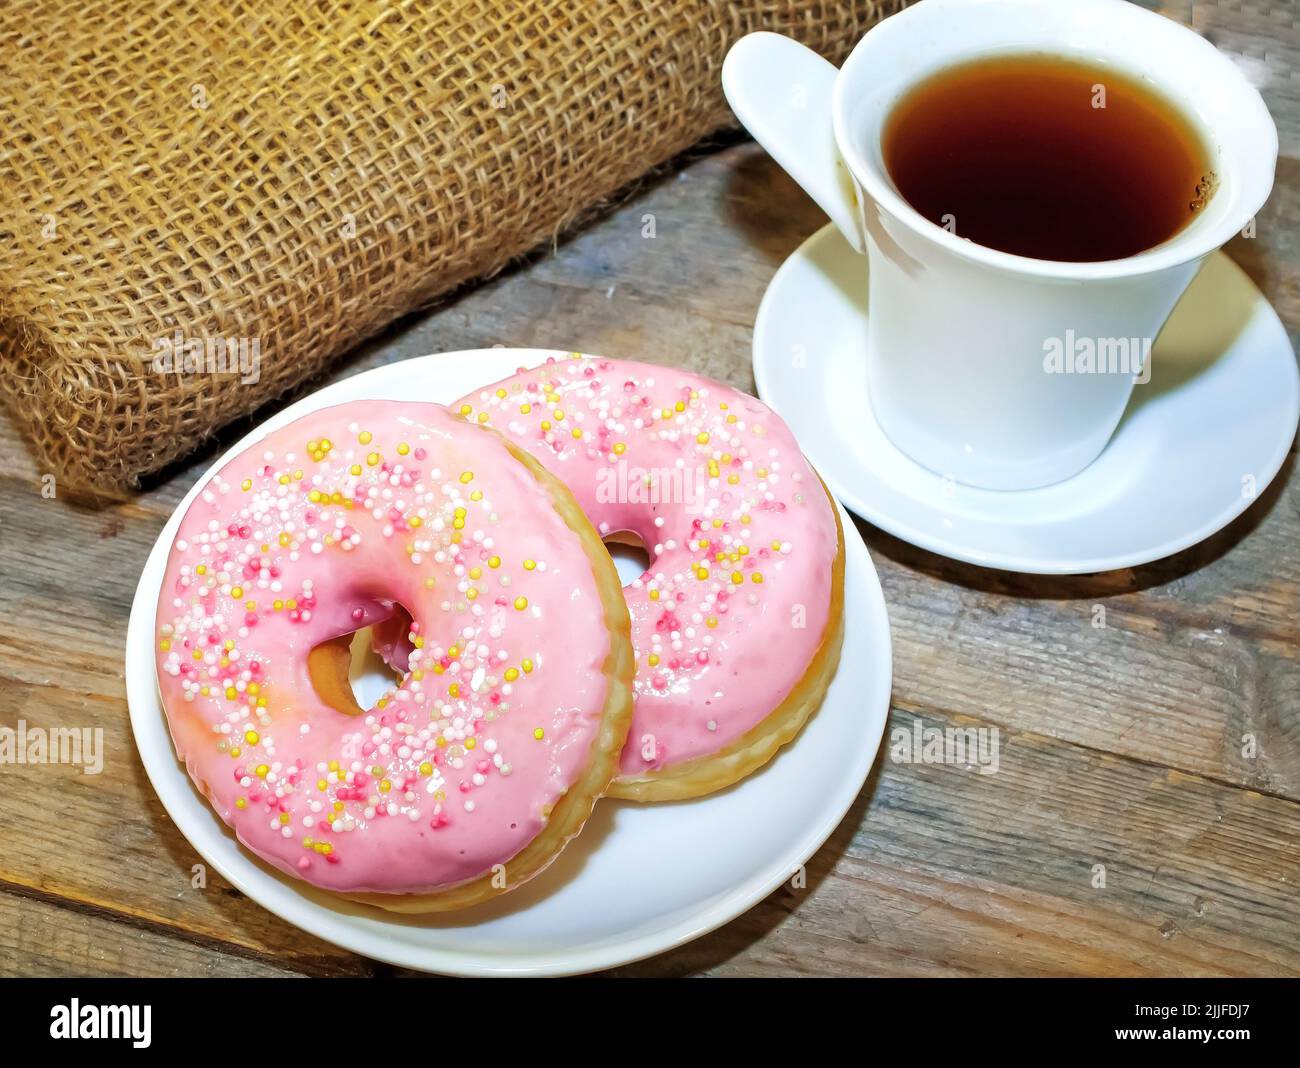 Sweet tasty donuts with sprinkling and fragrant tea. Stock Photo